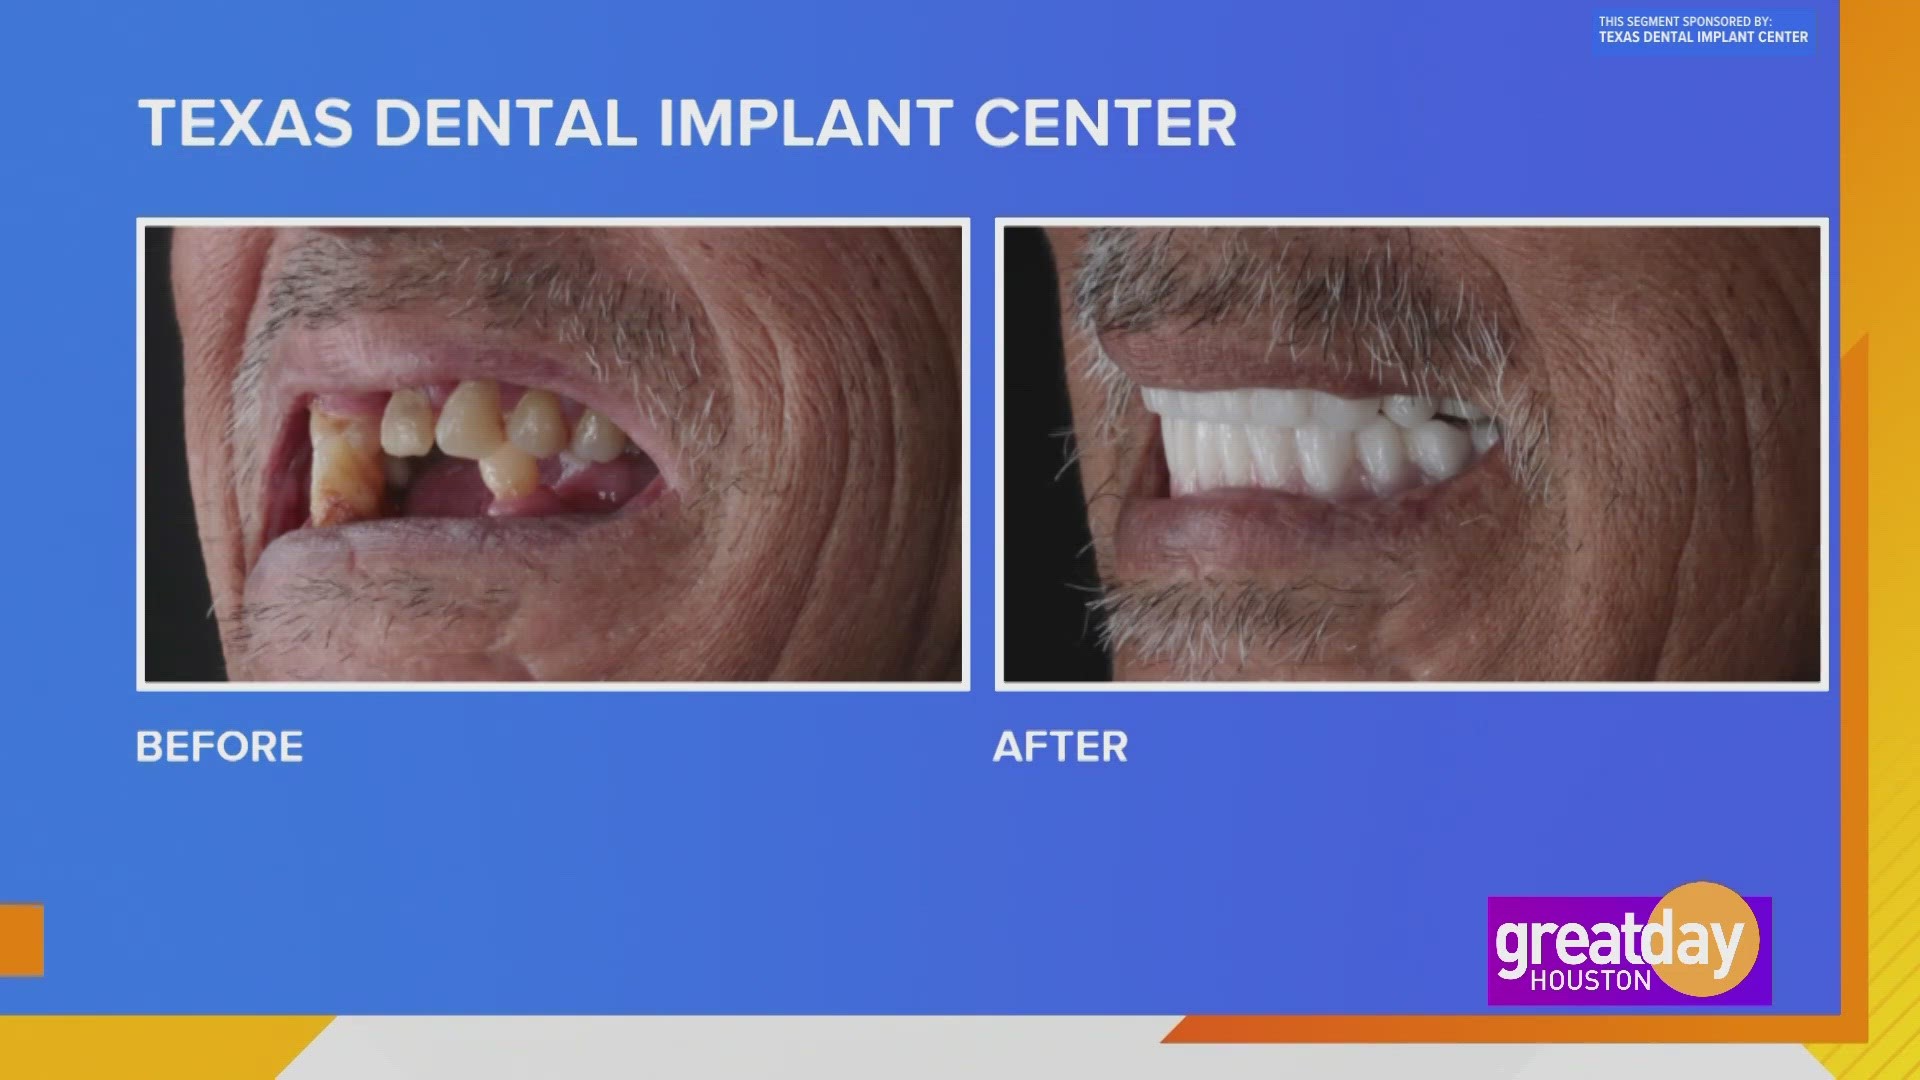 No more mean-mugging to hide what's behind your smile. Dr. Michel Azer with the Texas Dental Implant Center, shares how he helps your confidence through your smile!